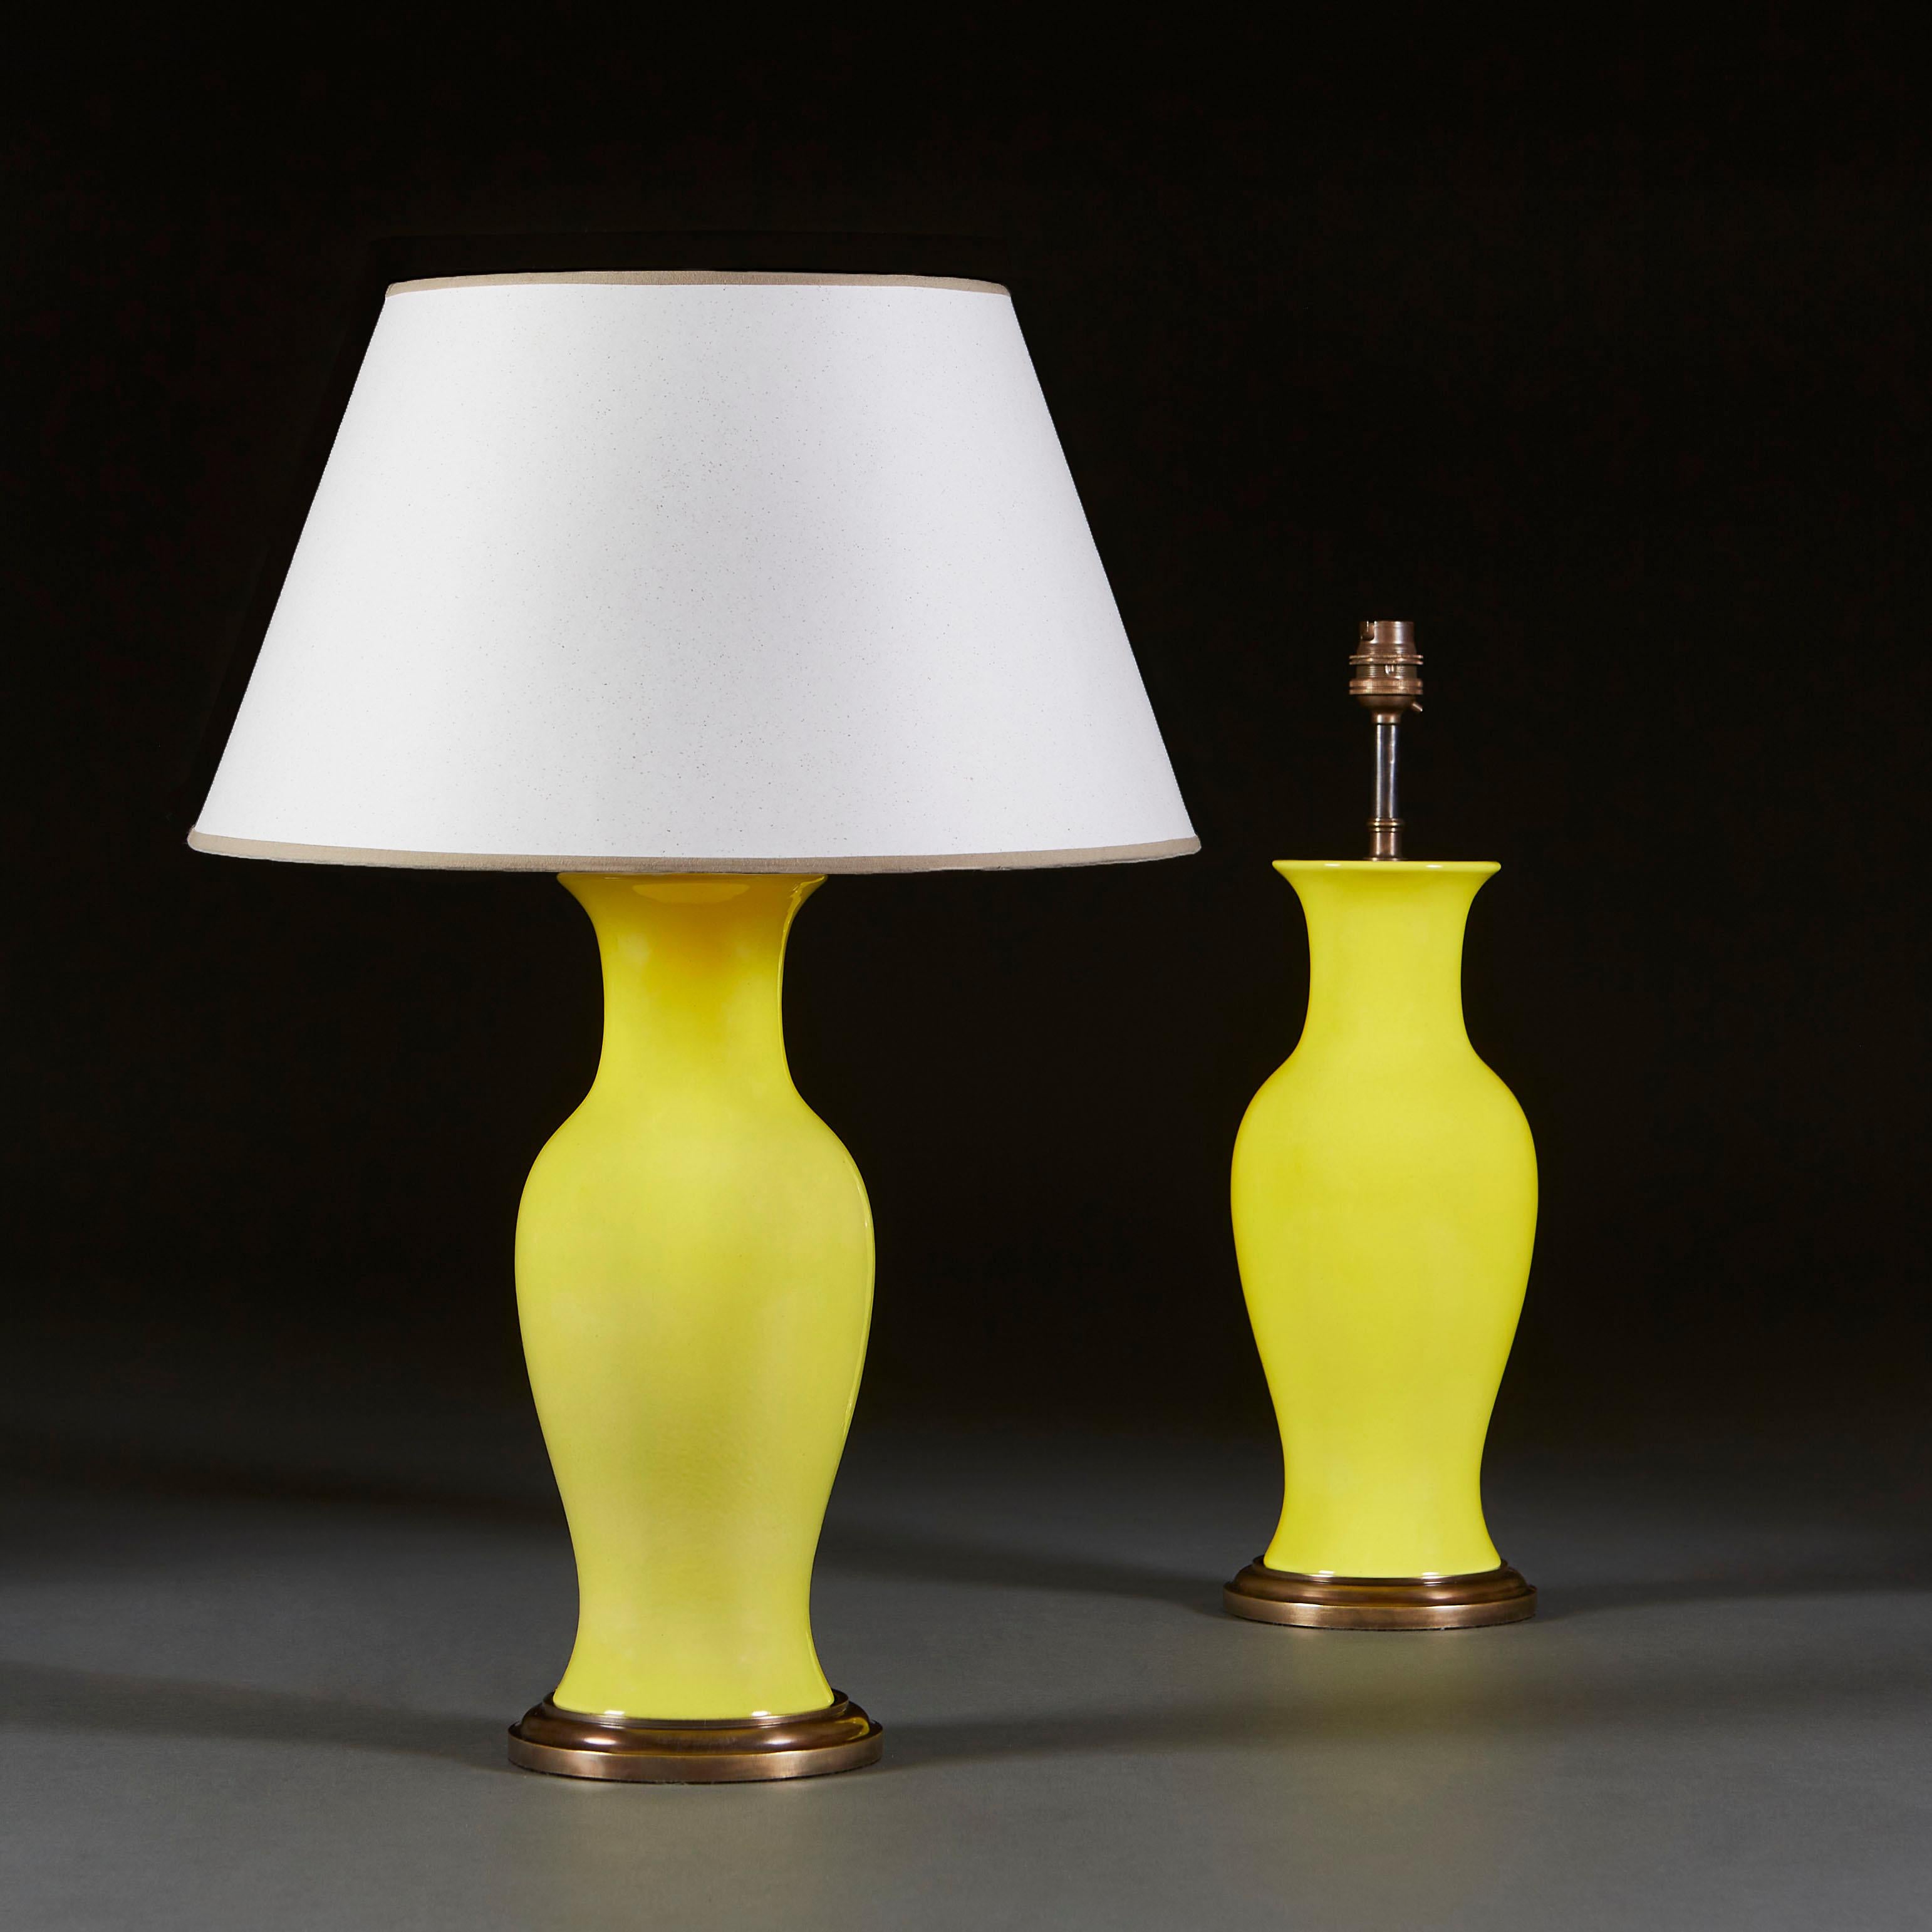 A pair of mid twentieth century Chinese vases of baluster form, with bright lemon yellow glaze, now mounted as lamps with turned brass bases.

Currently wired for the UK.

Please note: lampshades not included.